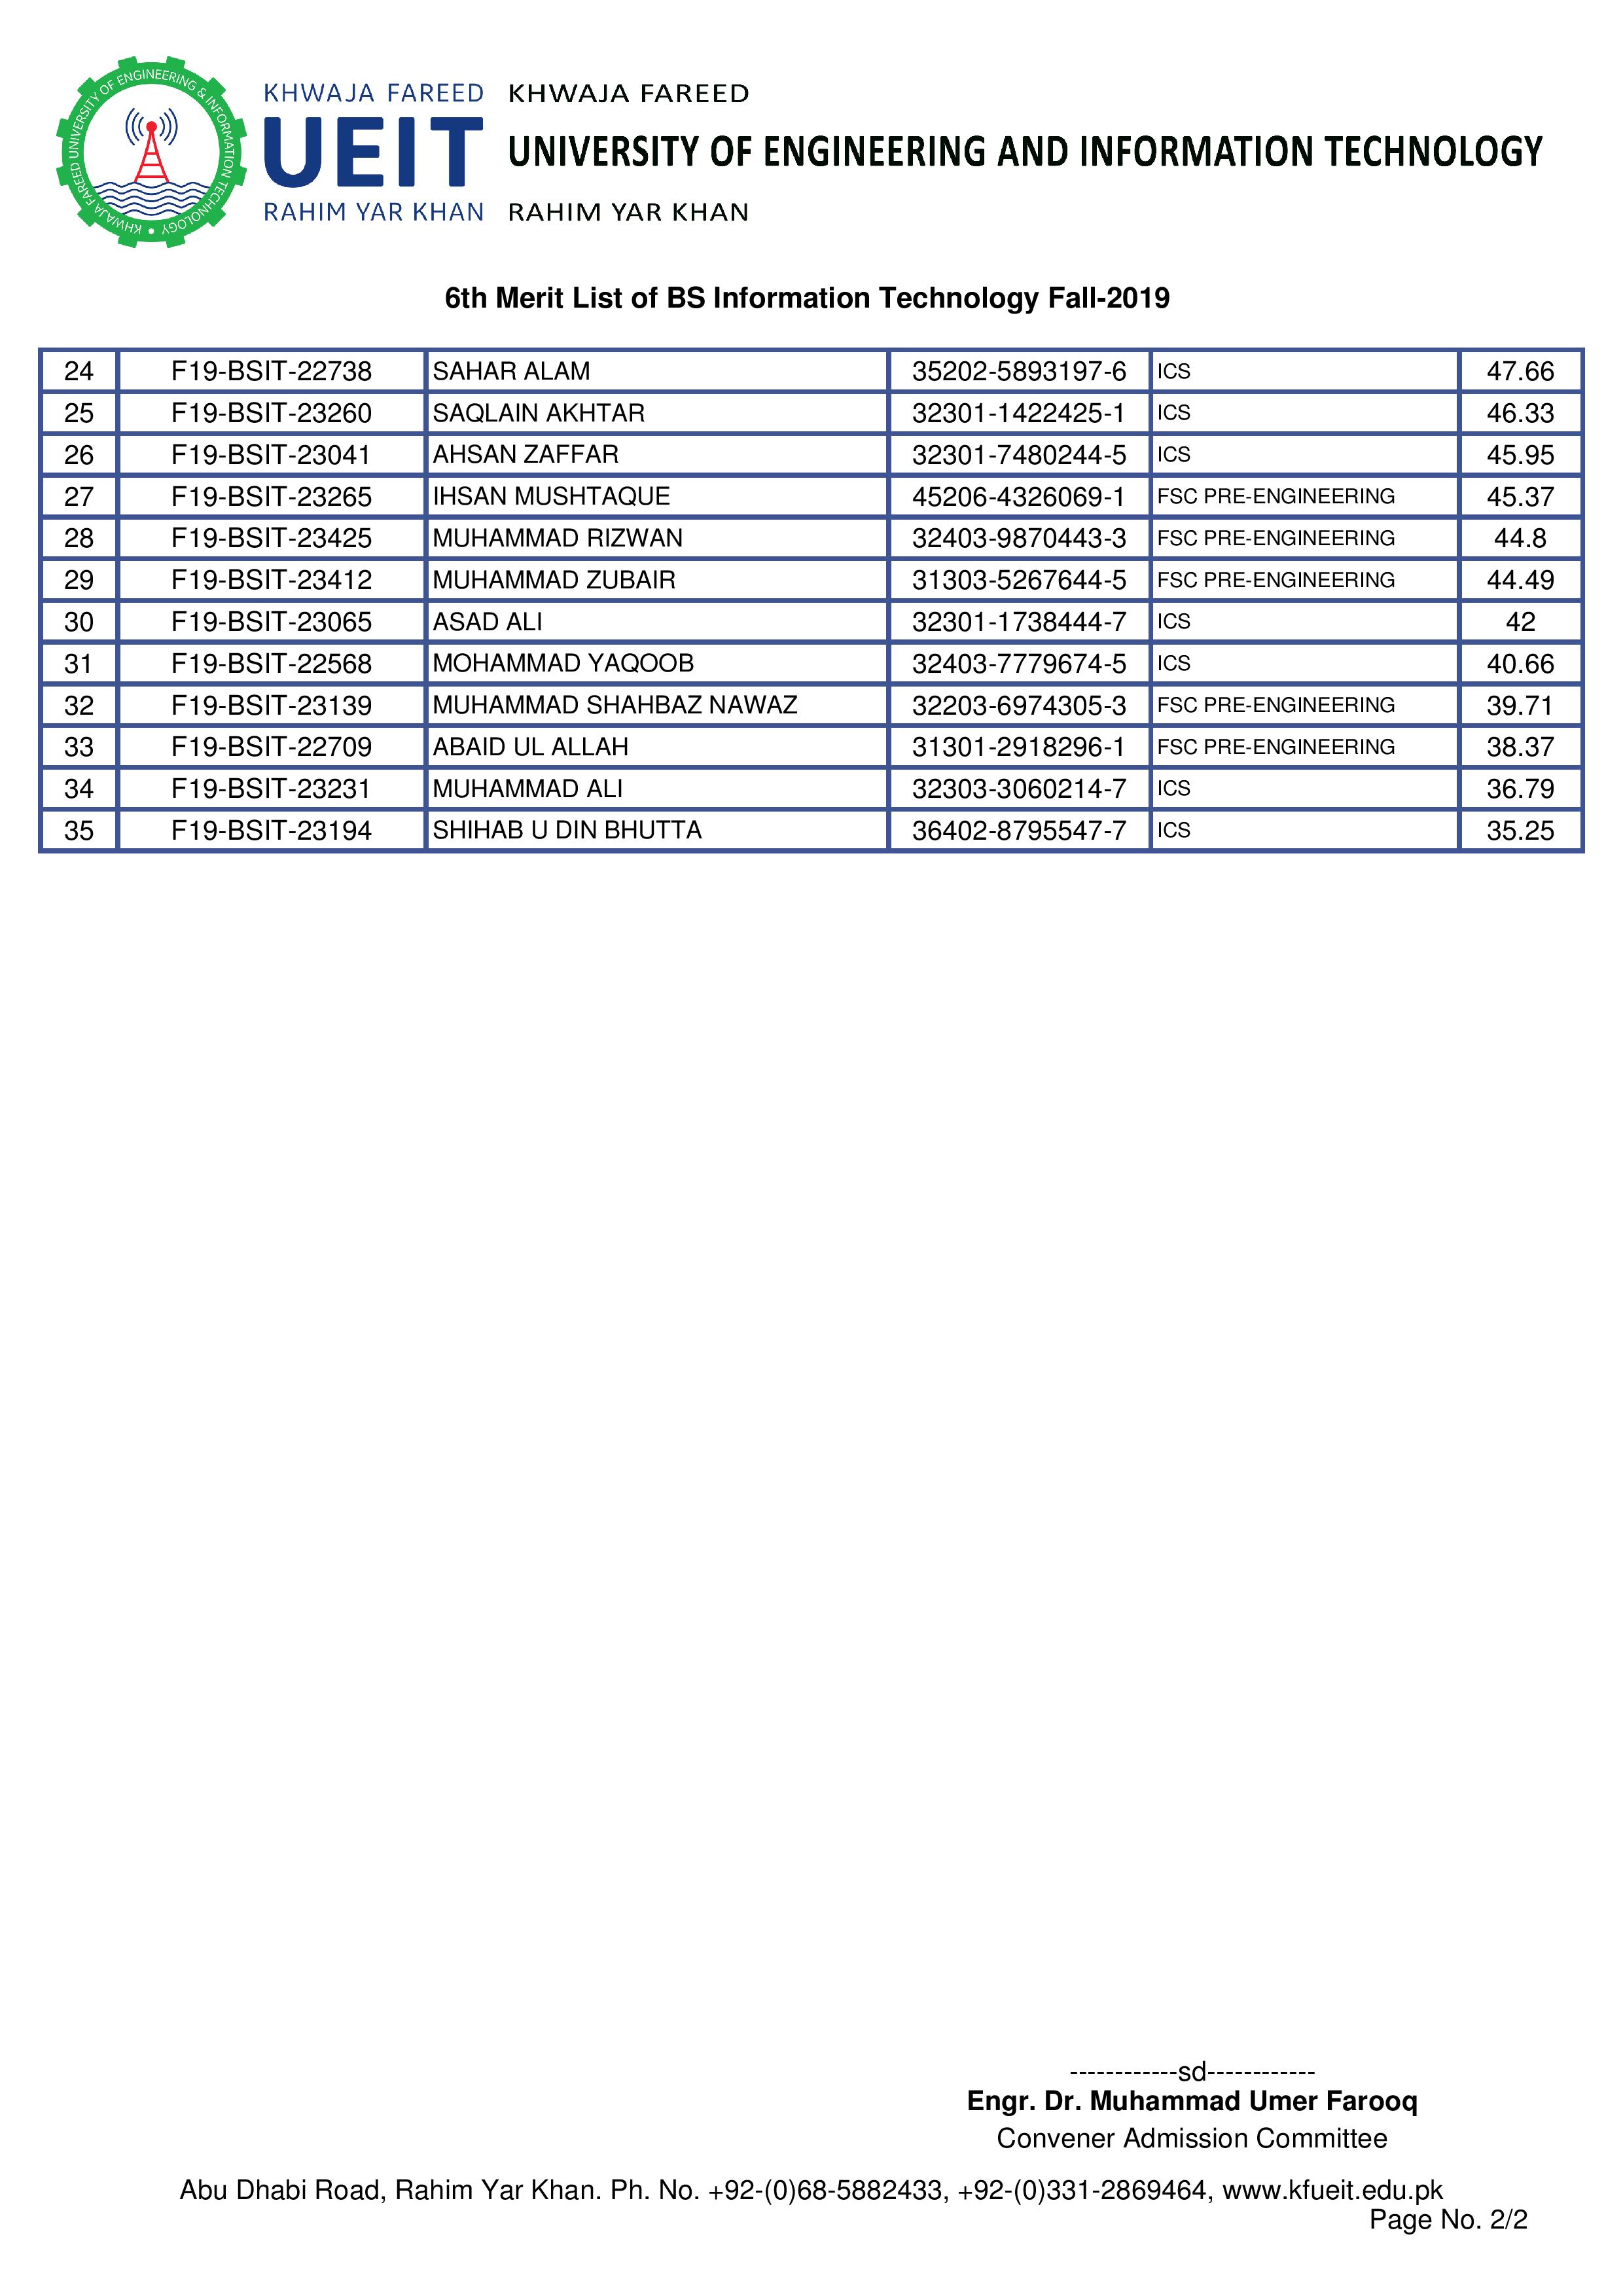 6th Merit List of BS Information Technology Fall-2019-page-002